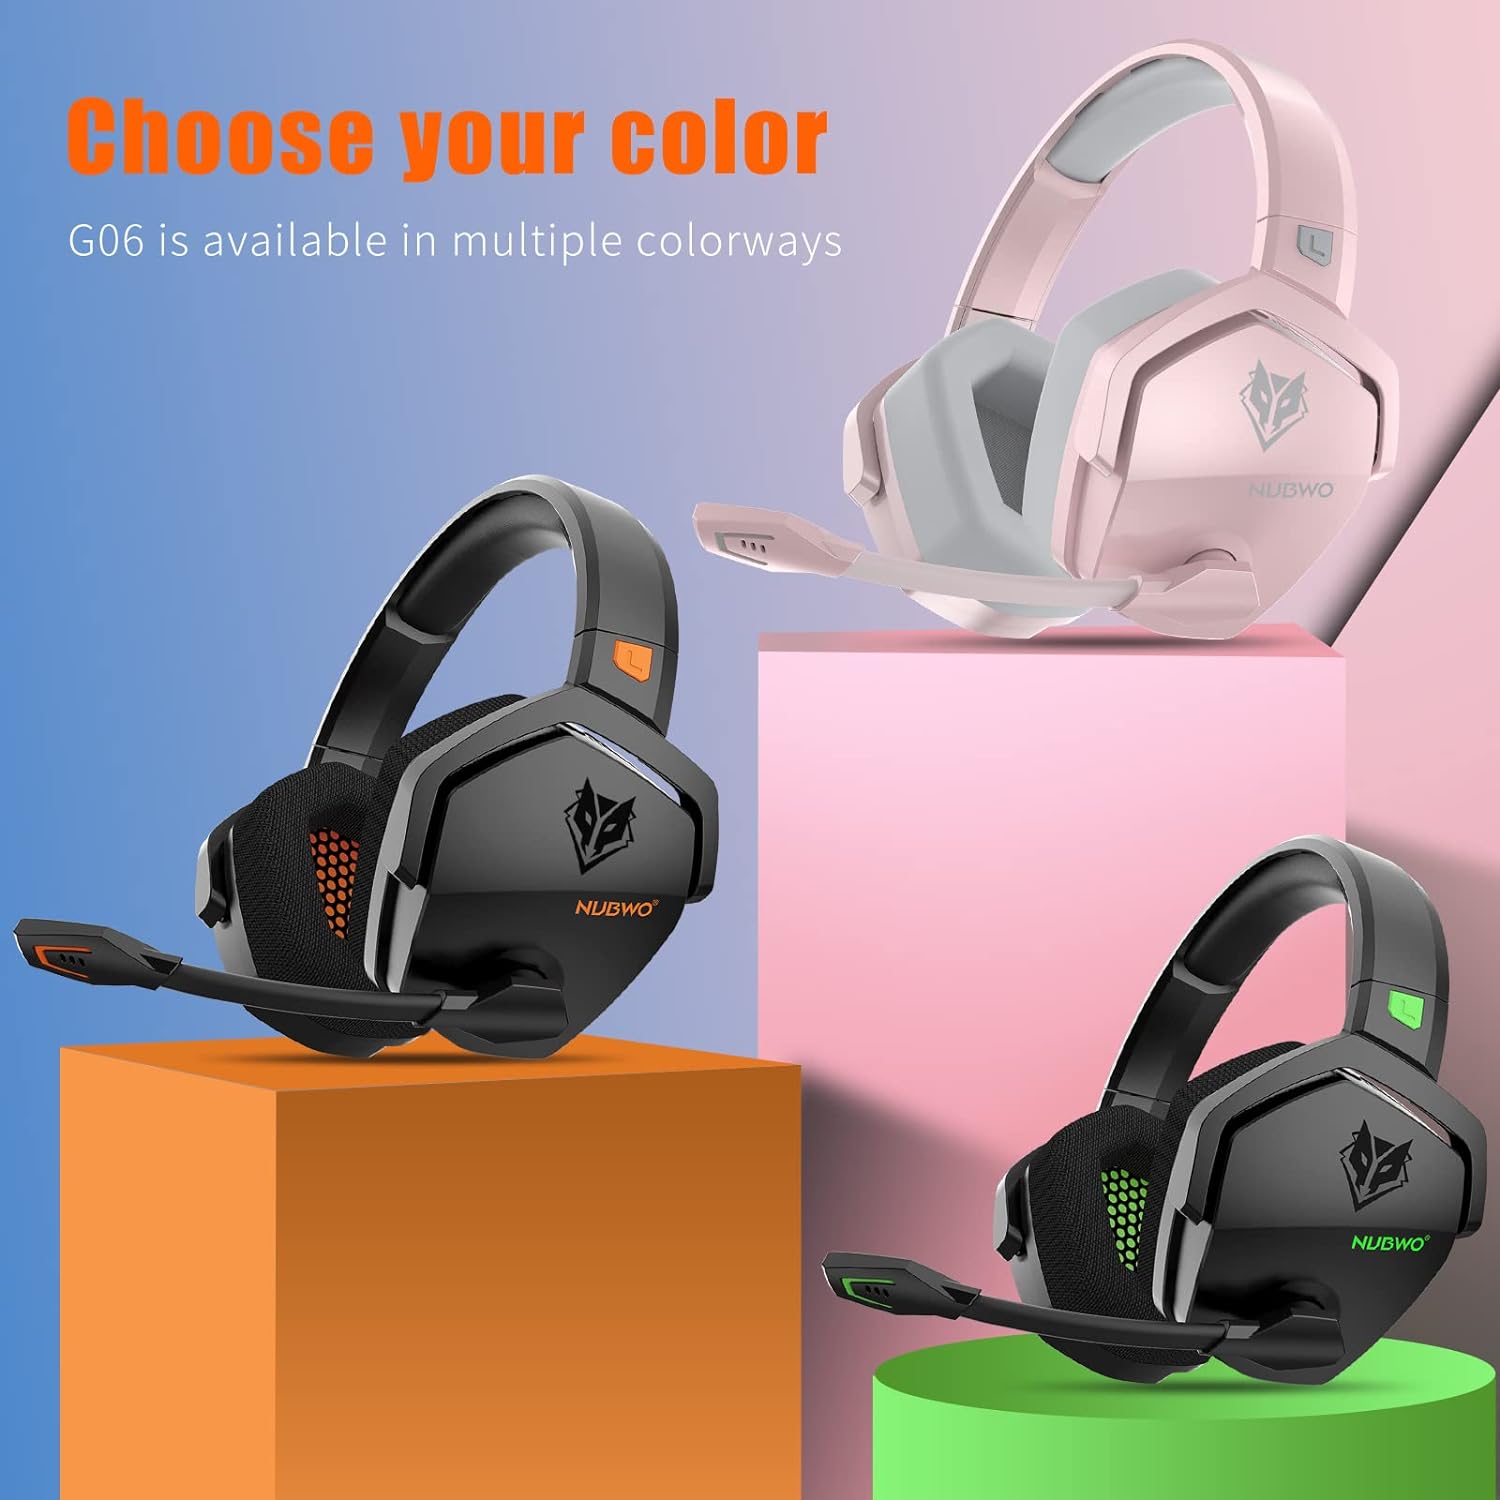 NUBWO G06 Dual Wireless Gaming Headset with Microphone for PS5, PS4, PC, Mobile, Switch: 2.4GHz Wireless + Bluetooth - 100 Hr Battery - 50mm Drivers - Orange